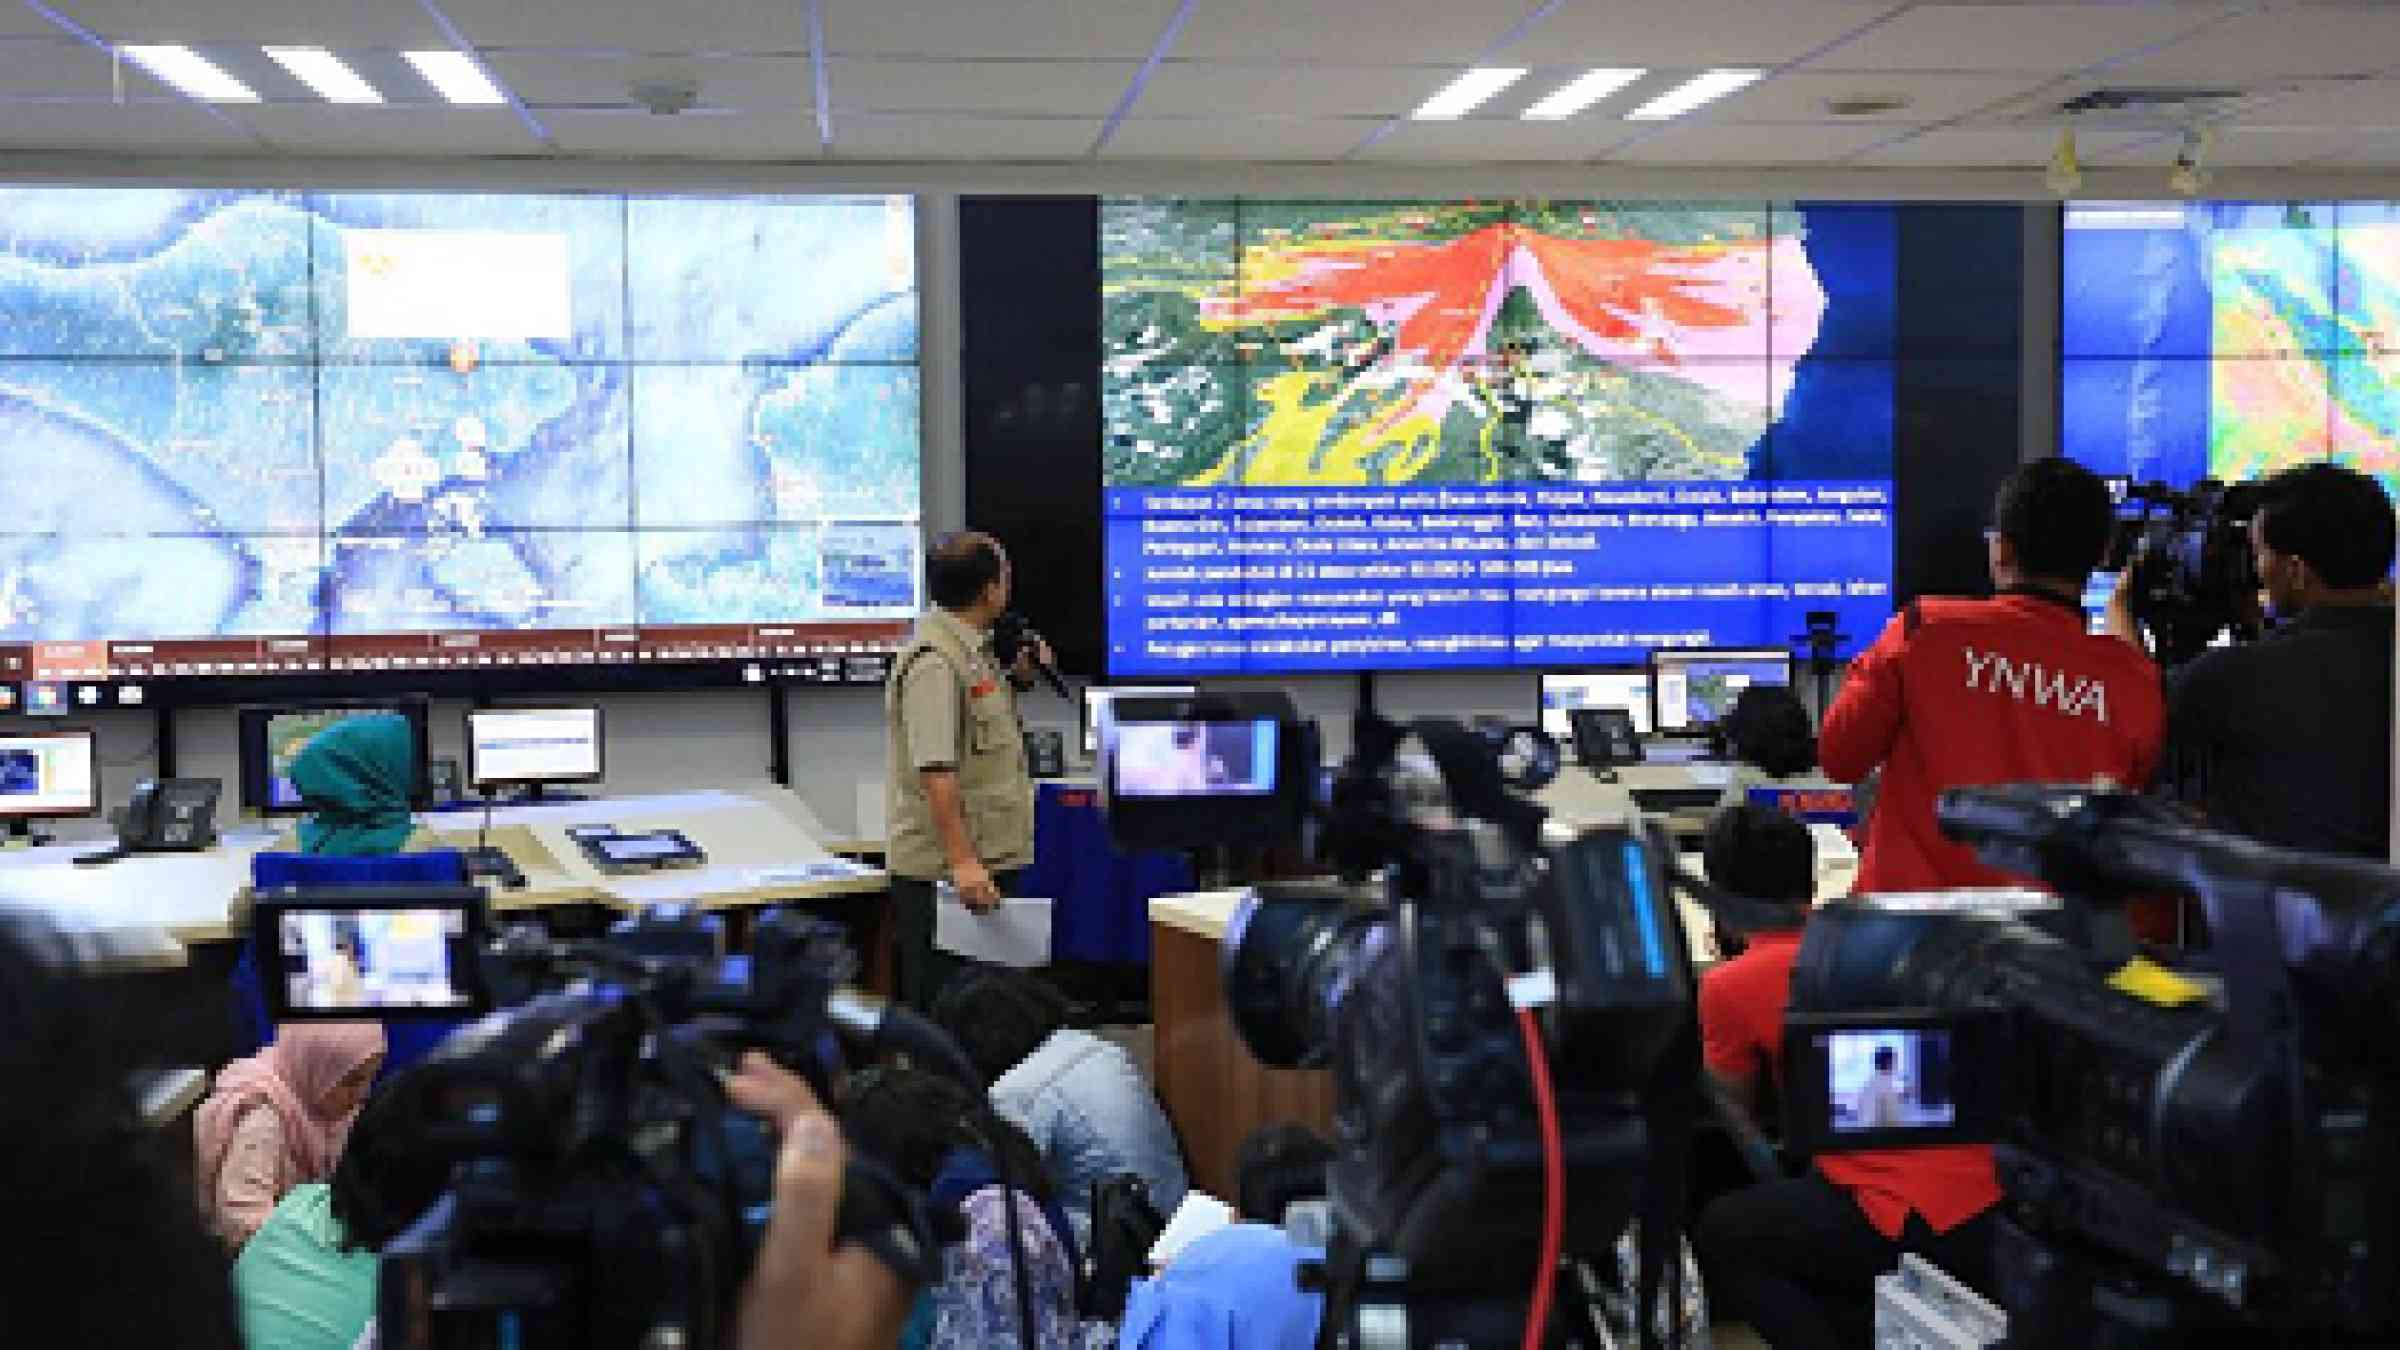 Indonesia’s National Disaster Management Agency (BNPB) during press conference to show potential impacts of recent Mount Agung eruptions (photo: Pacific Disaster Center)